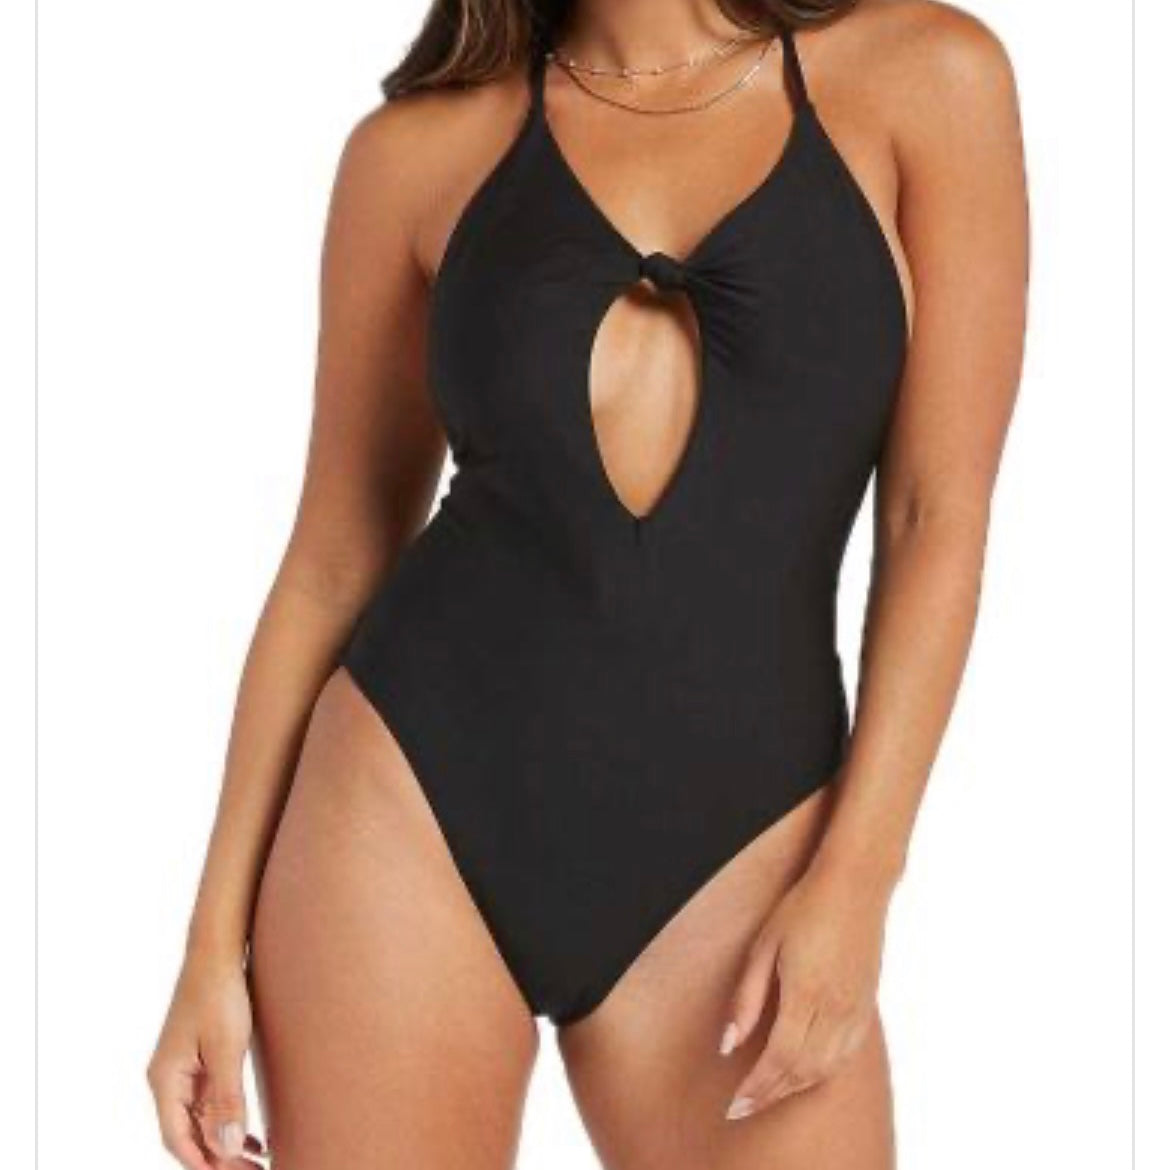 Simply Seamless One Piece Women's Swimsuit